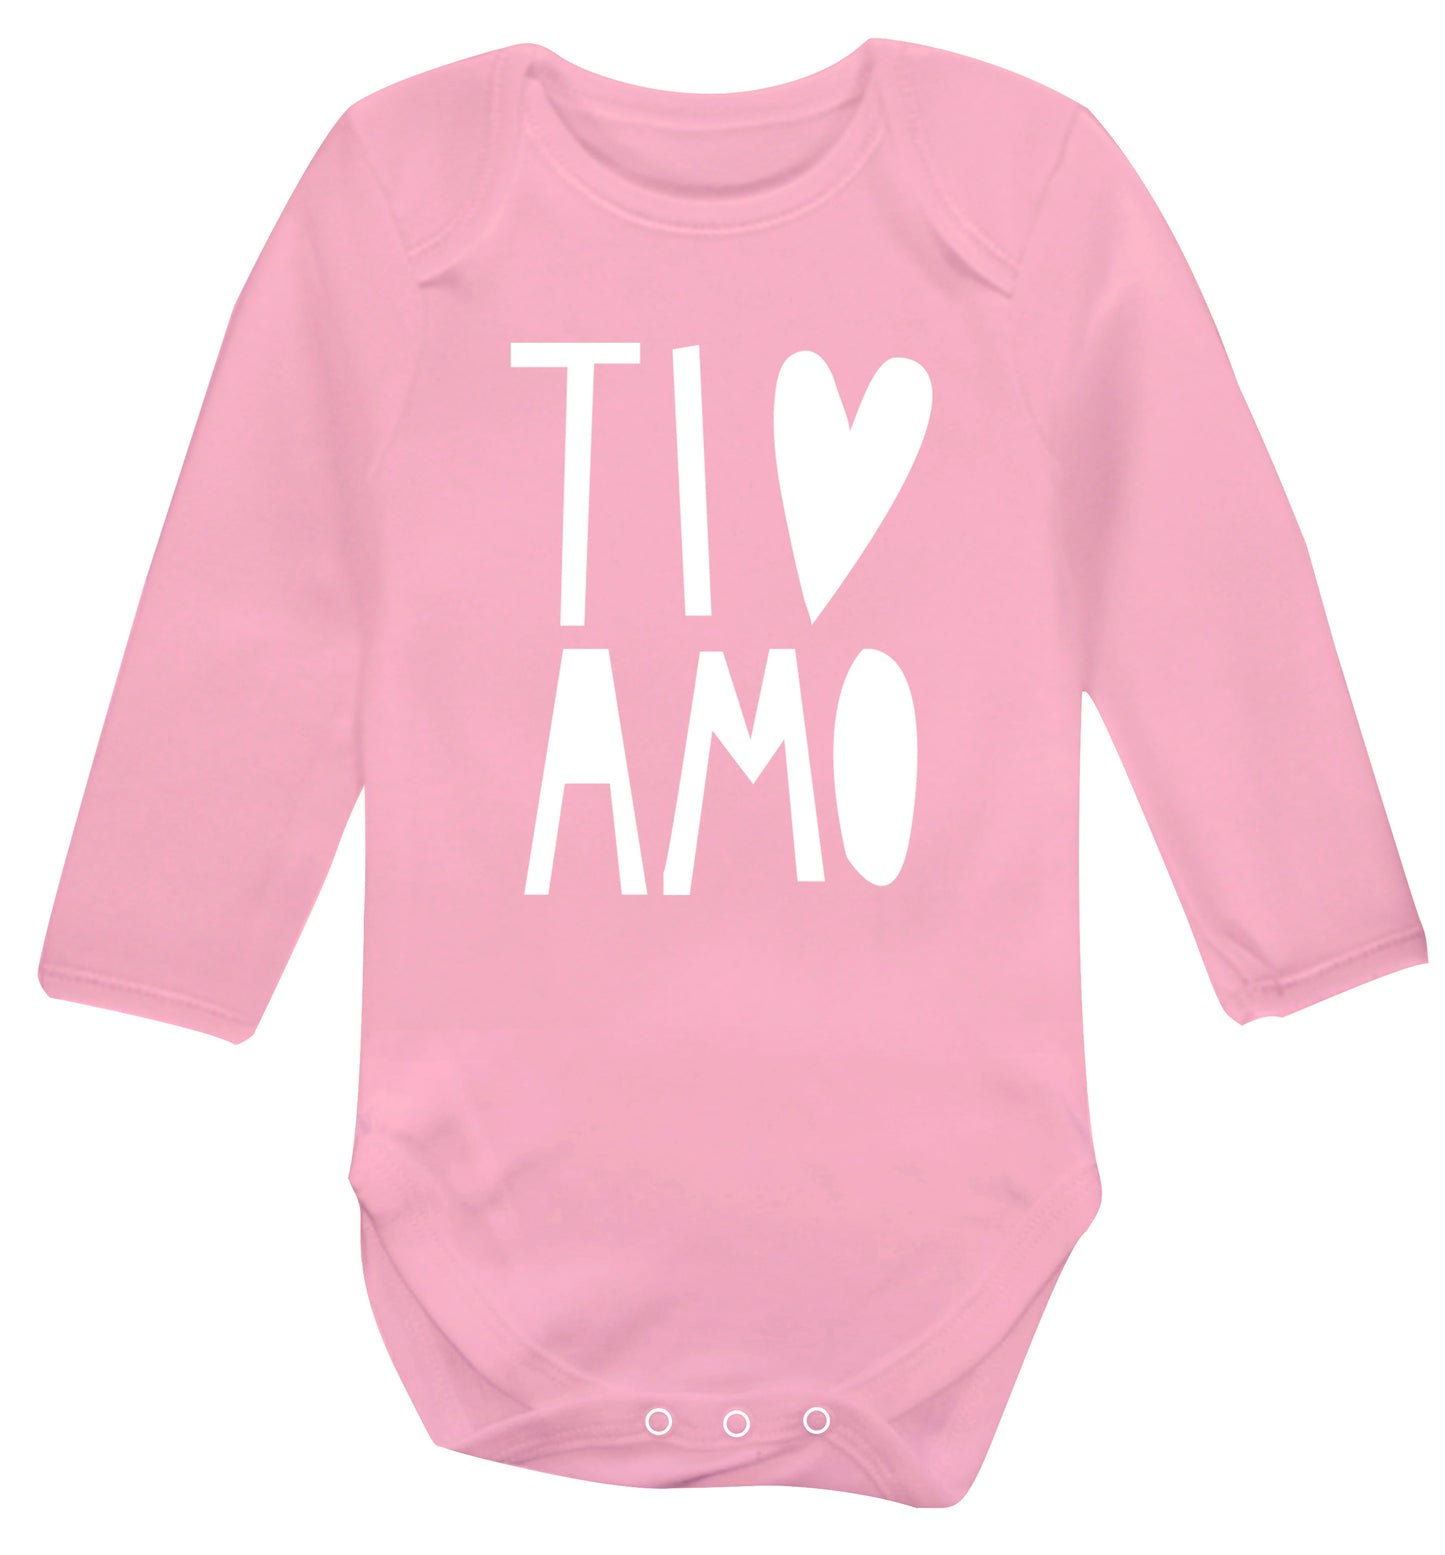 Ti amo - I love you Baby Vest long sleeved pale pink 6-12 months